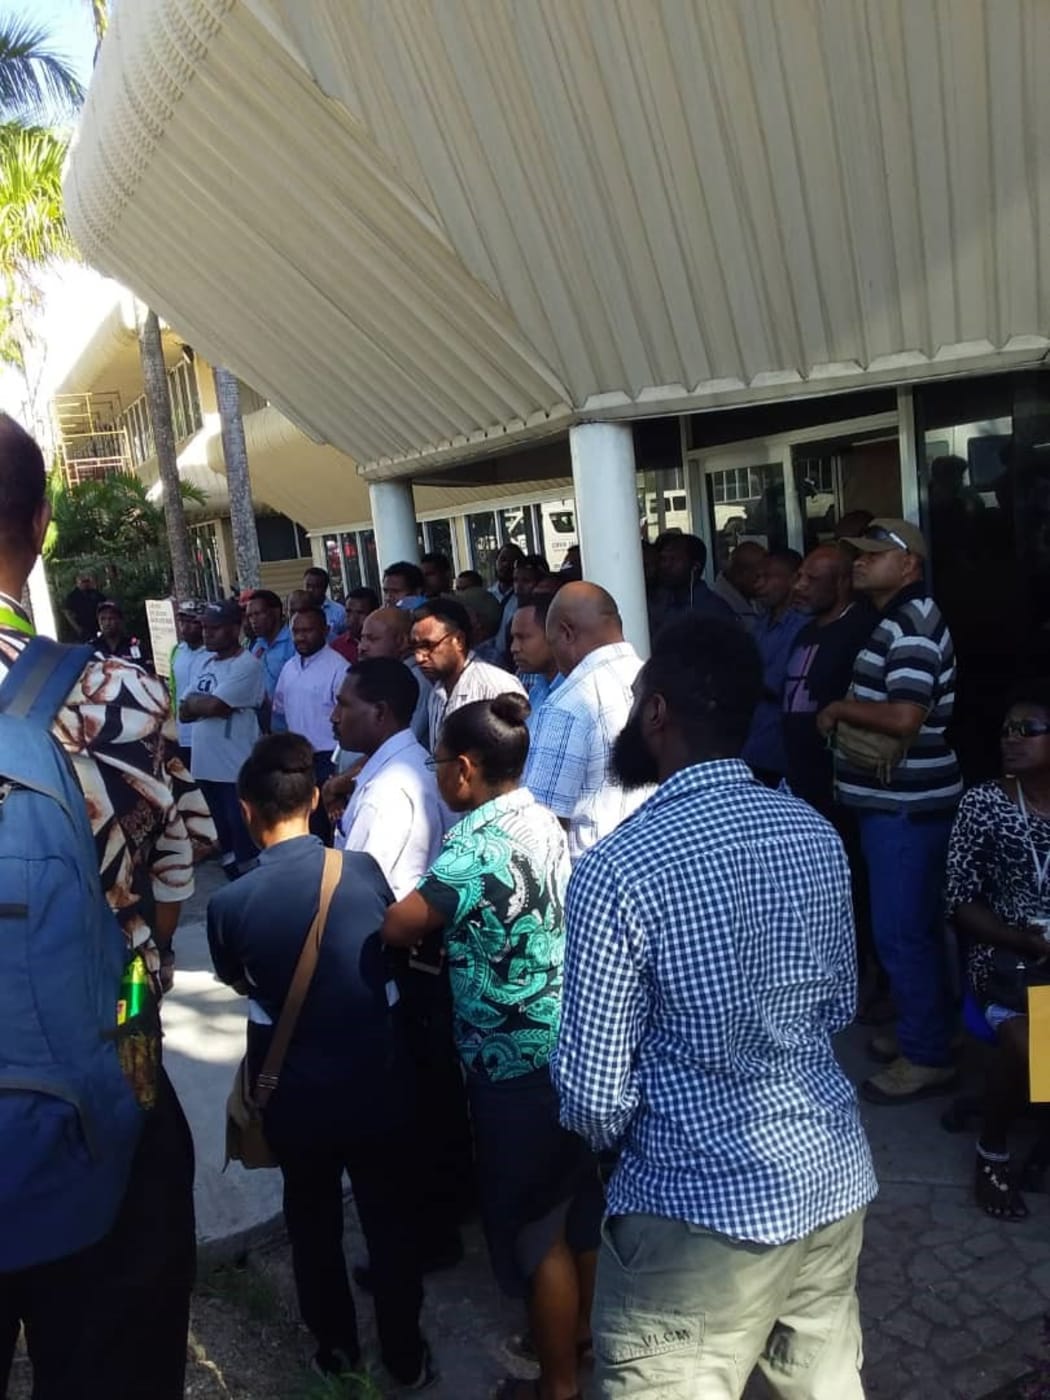 Protest at Papua New Guinea's National Statistics Office in Port Moresby, after dozens of workers were told of job lay-offs. 10 July 2019